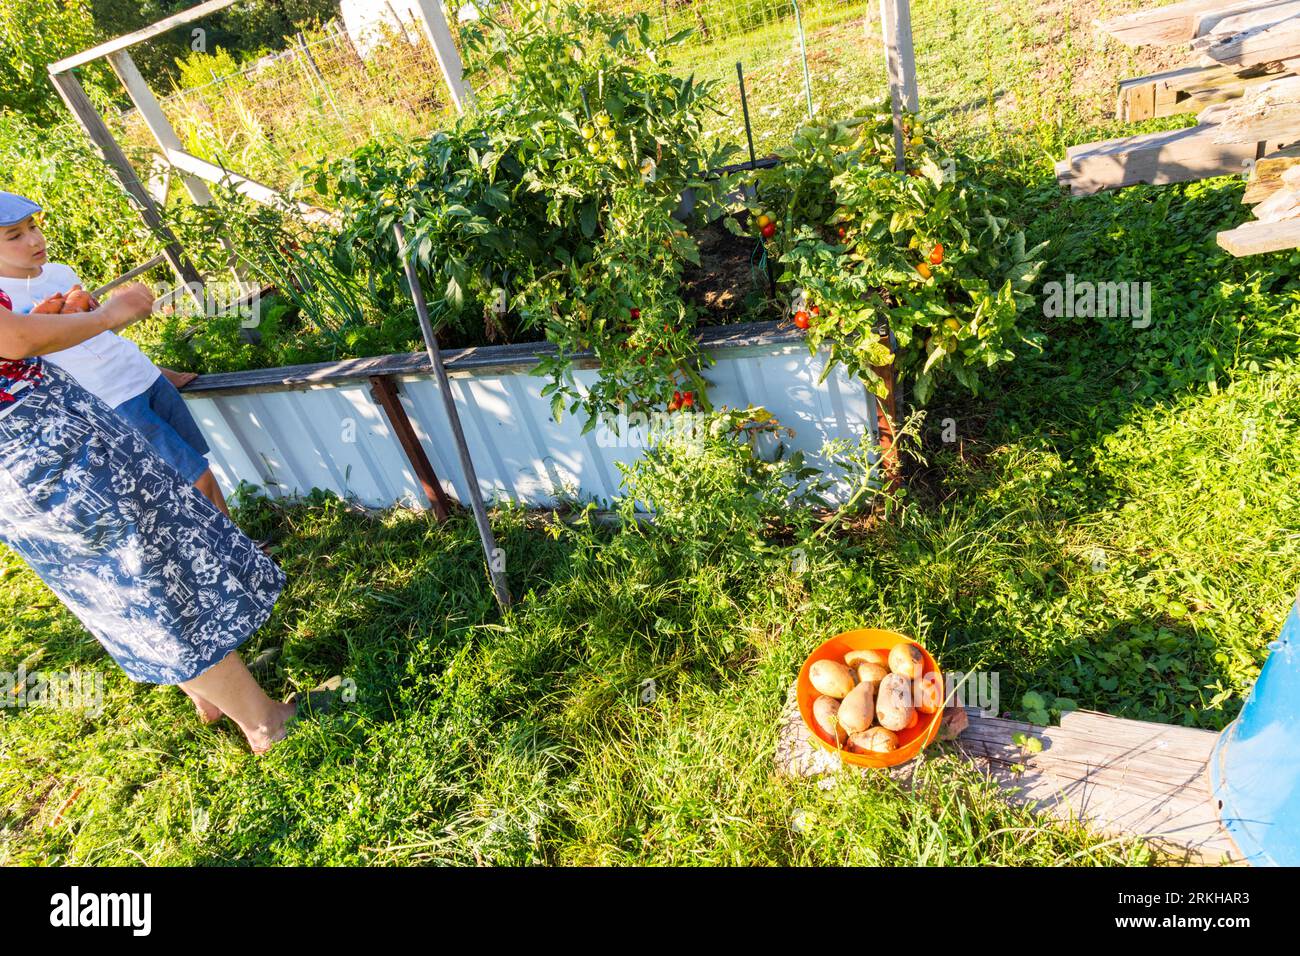 Chemical-free outdoor carrot, potato and paprika production in rural garden, Hungary Stock Photo